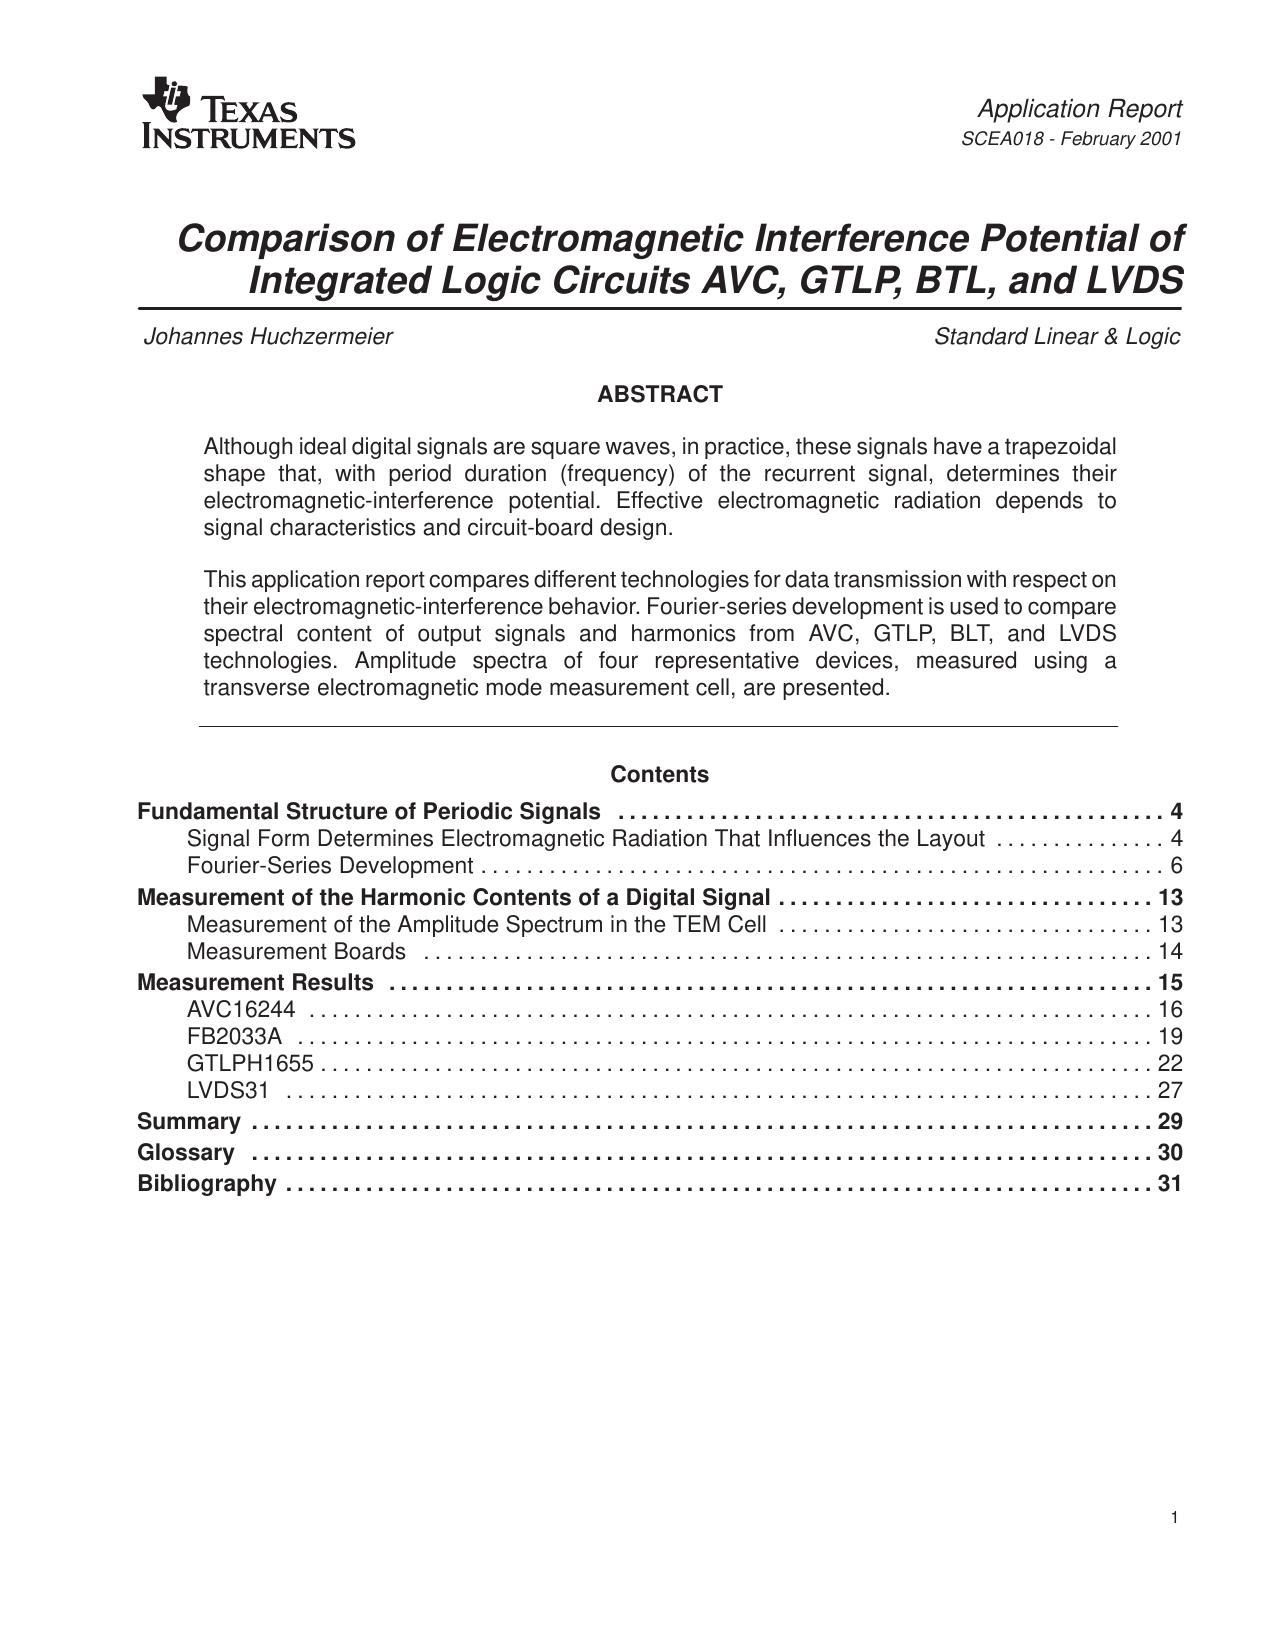 Comparison of Electromagnetic Interference Potential of Integrated Logic Circuit